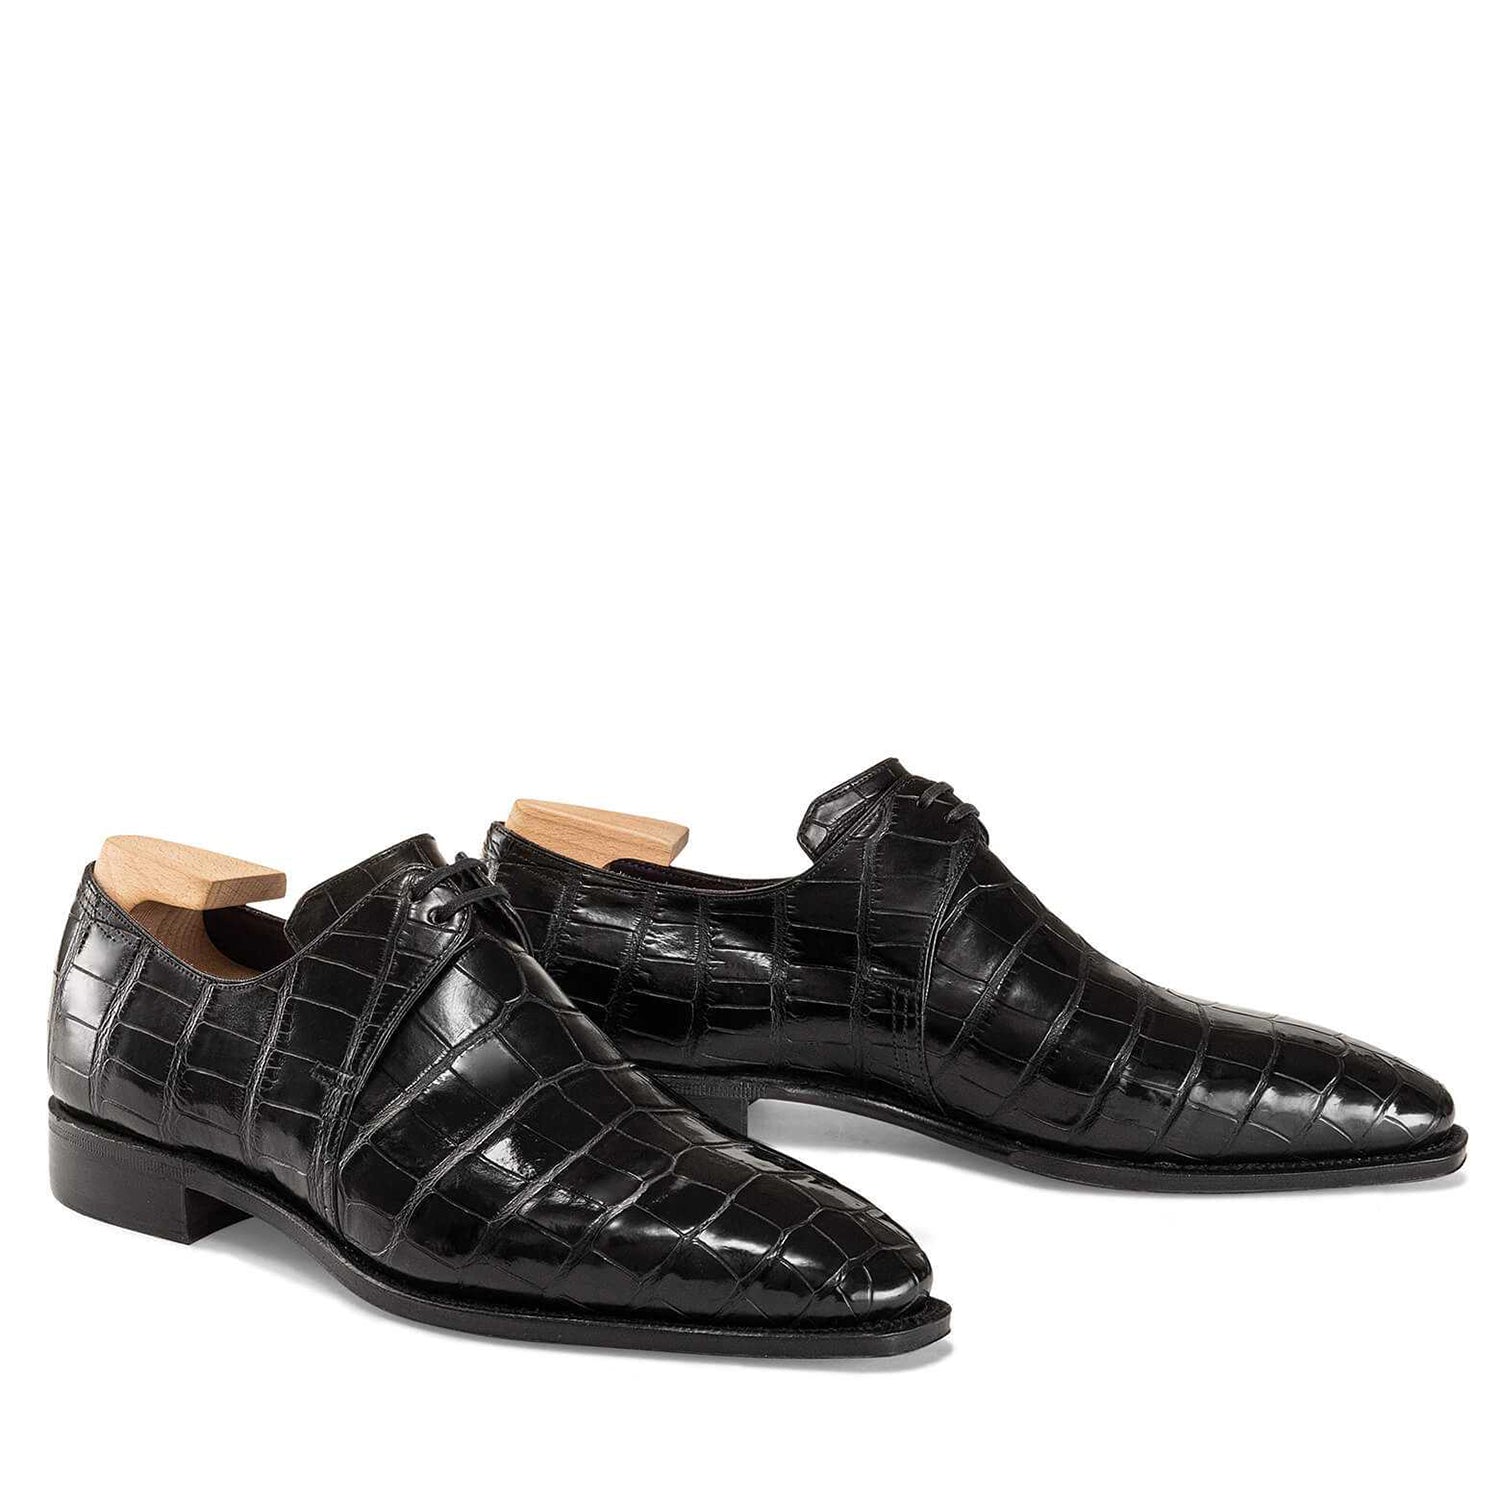 Croco Black Leather Shoes